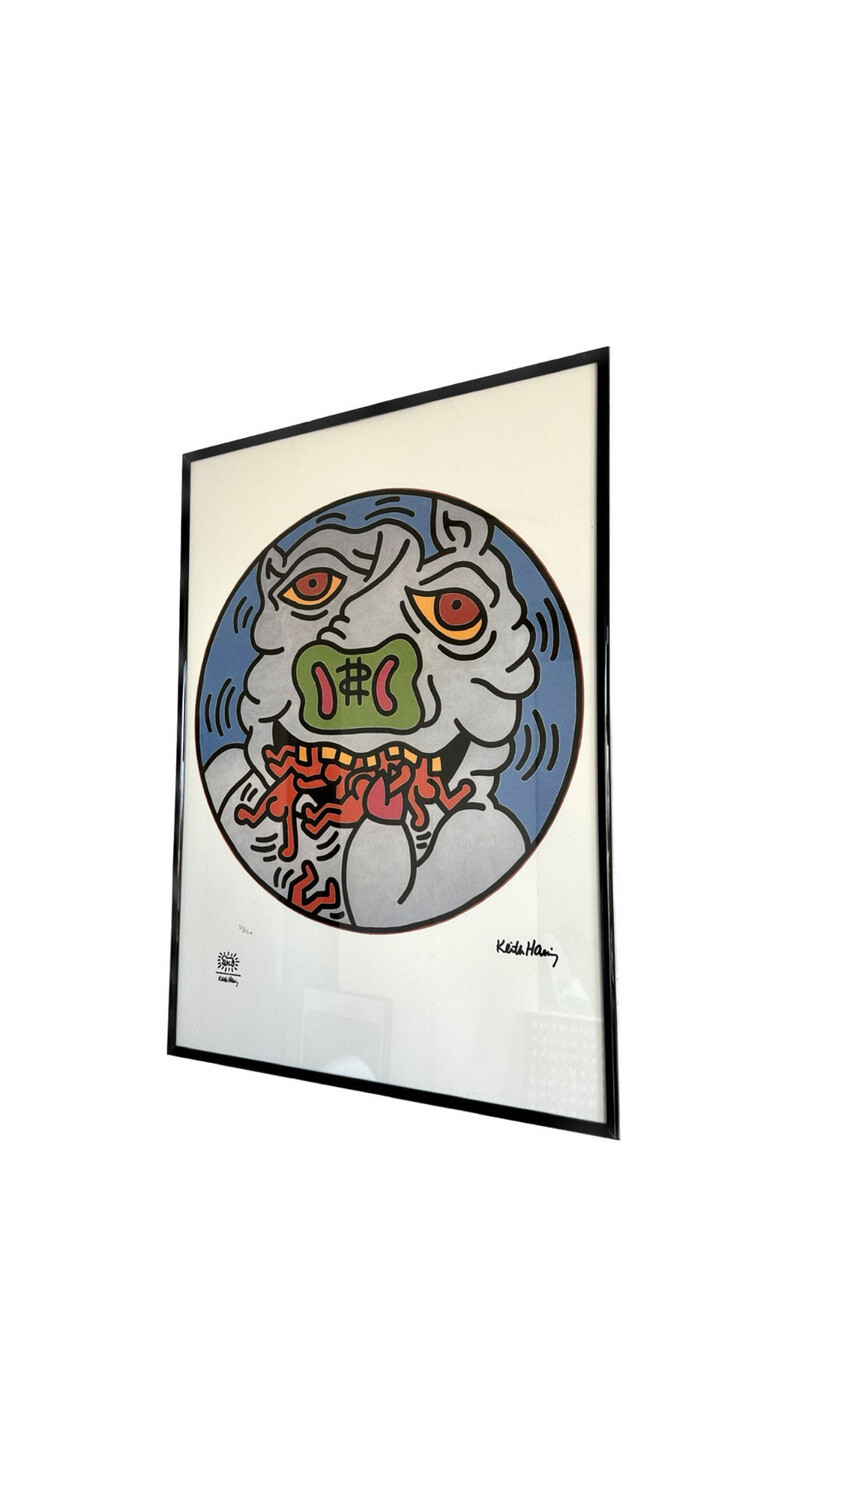 Keith Haring limited edition 31/150